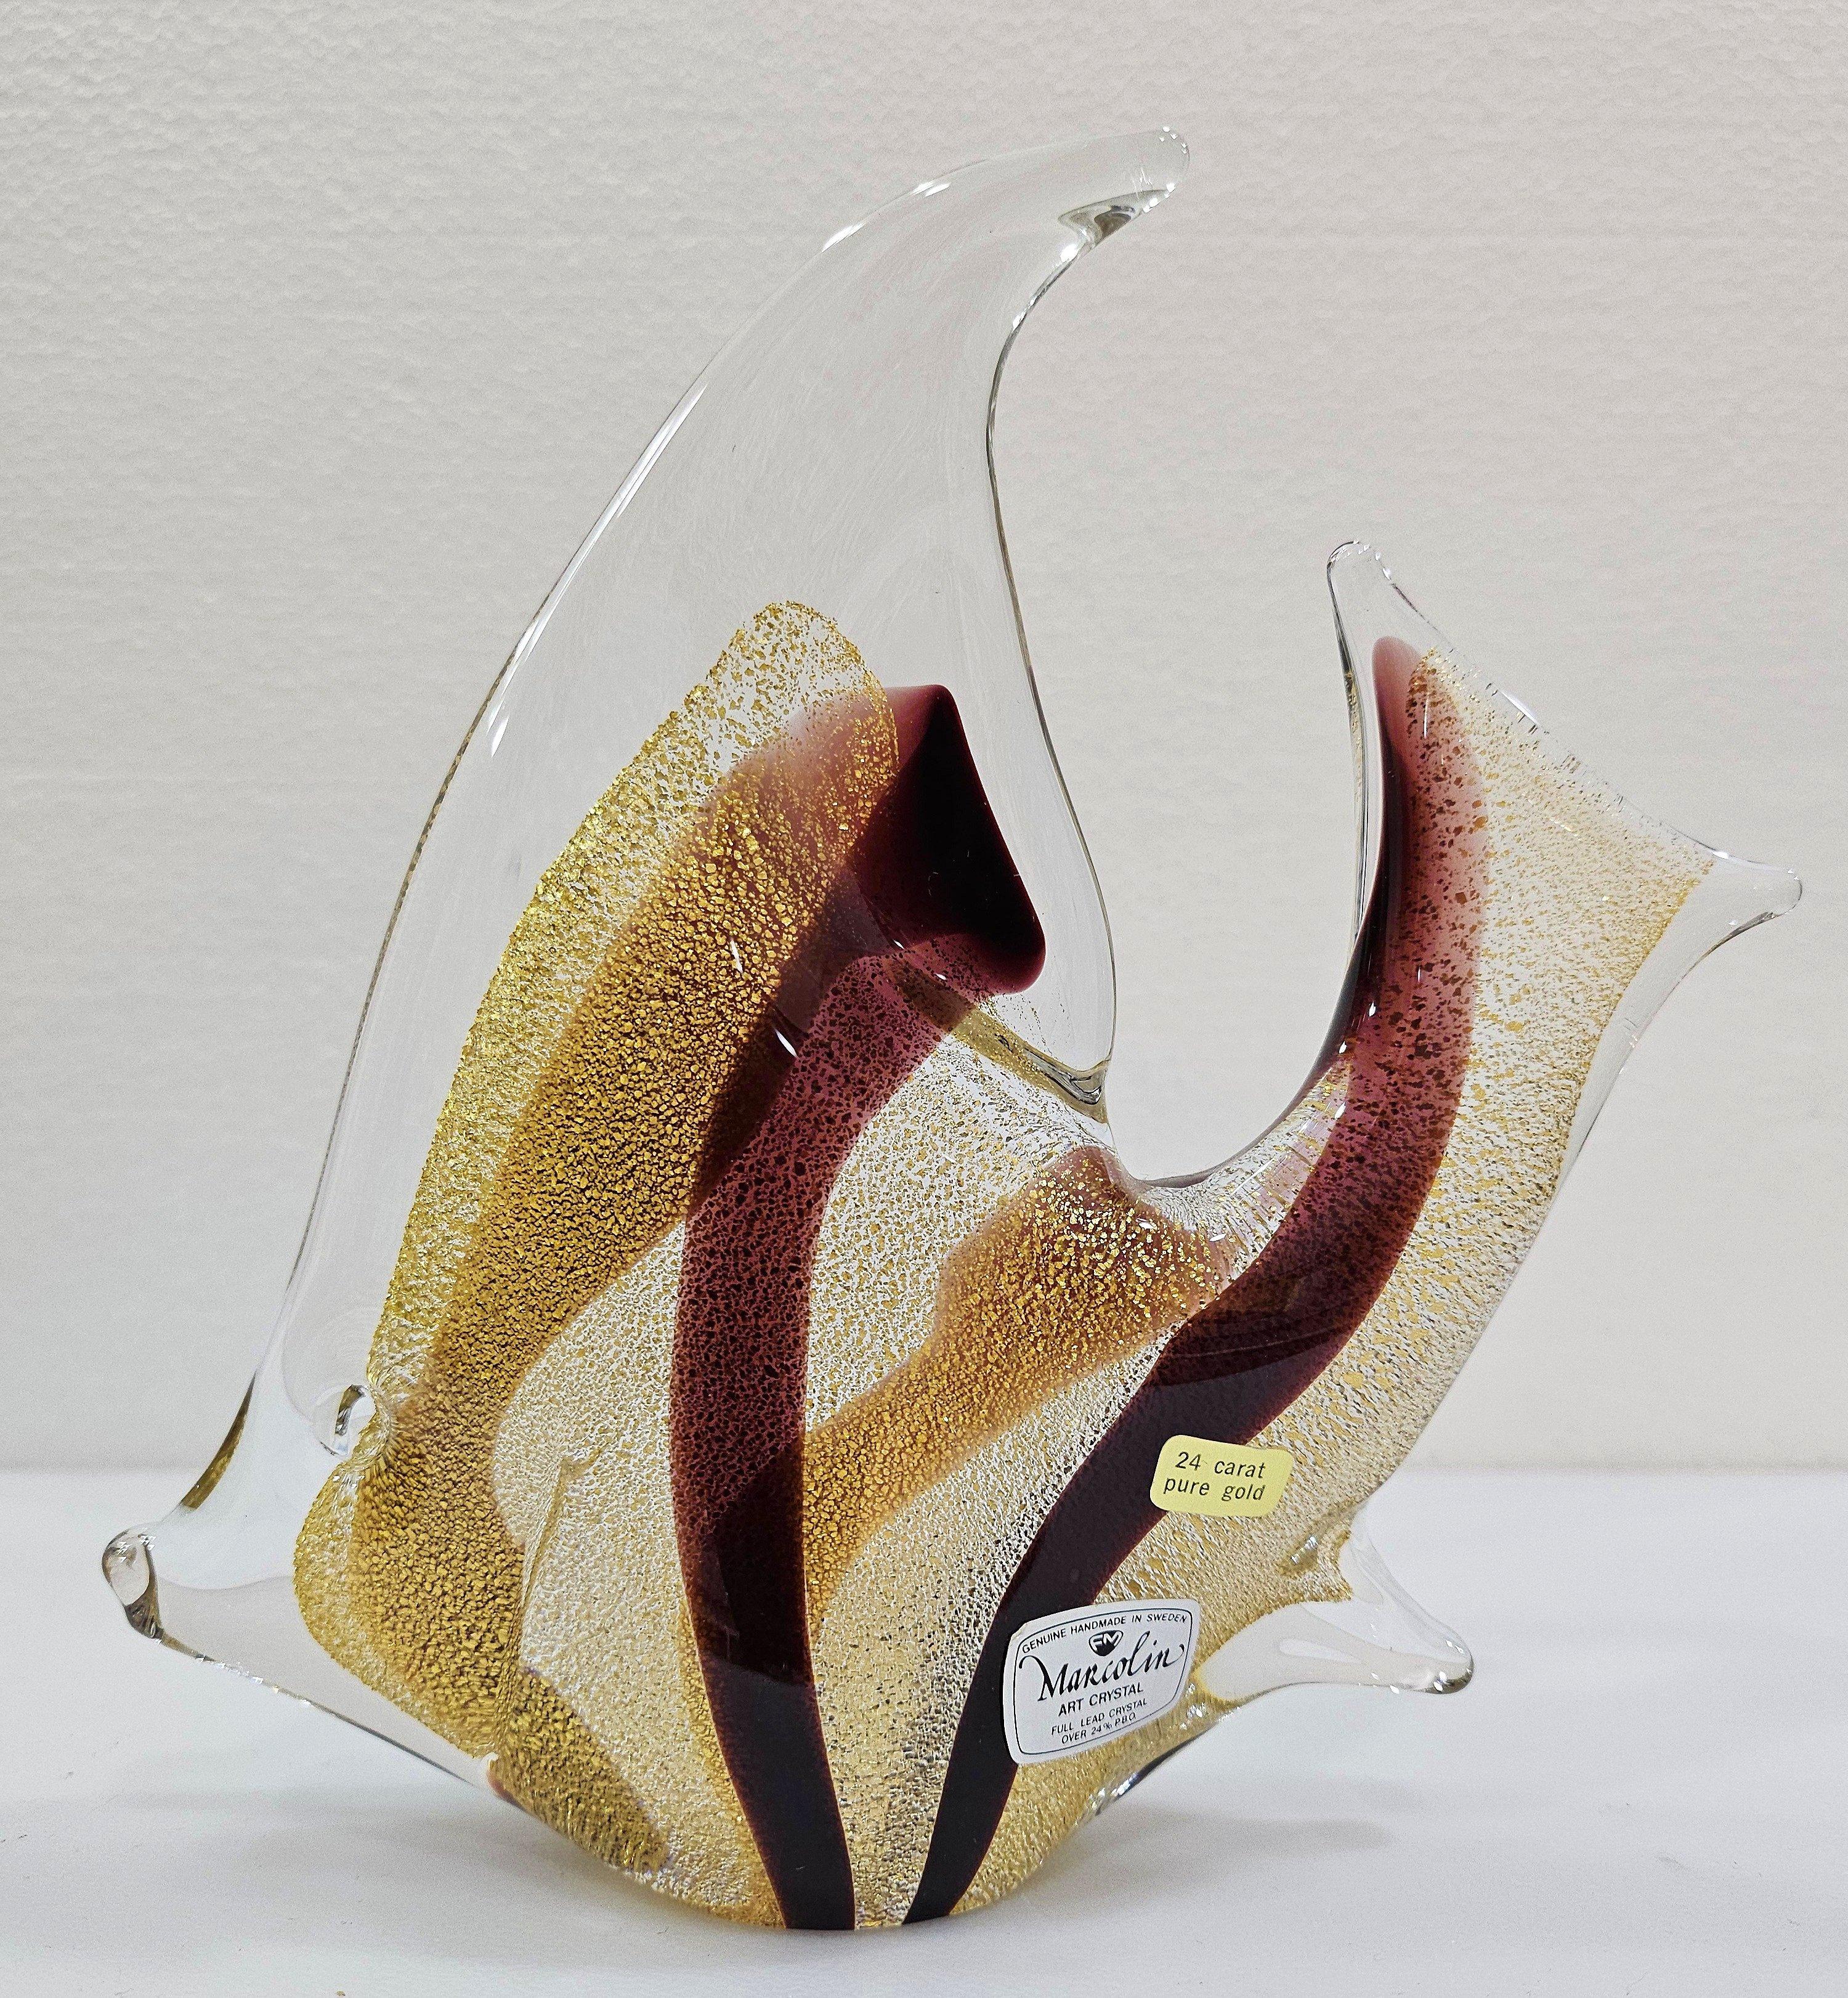 Swedish Signed, 24k gold infused, Glass Fish Sculpture by Josef Marcolin. For Sale